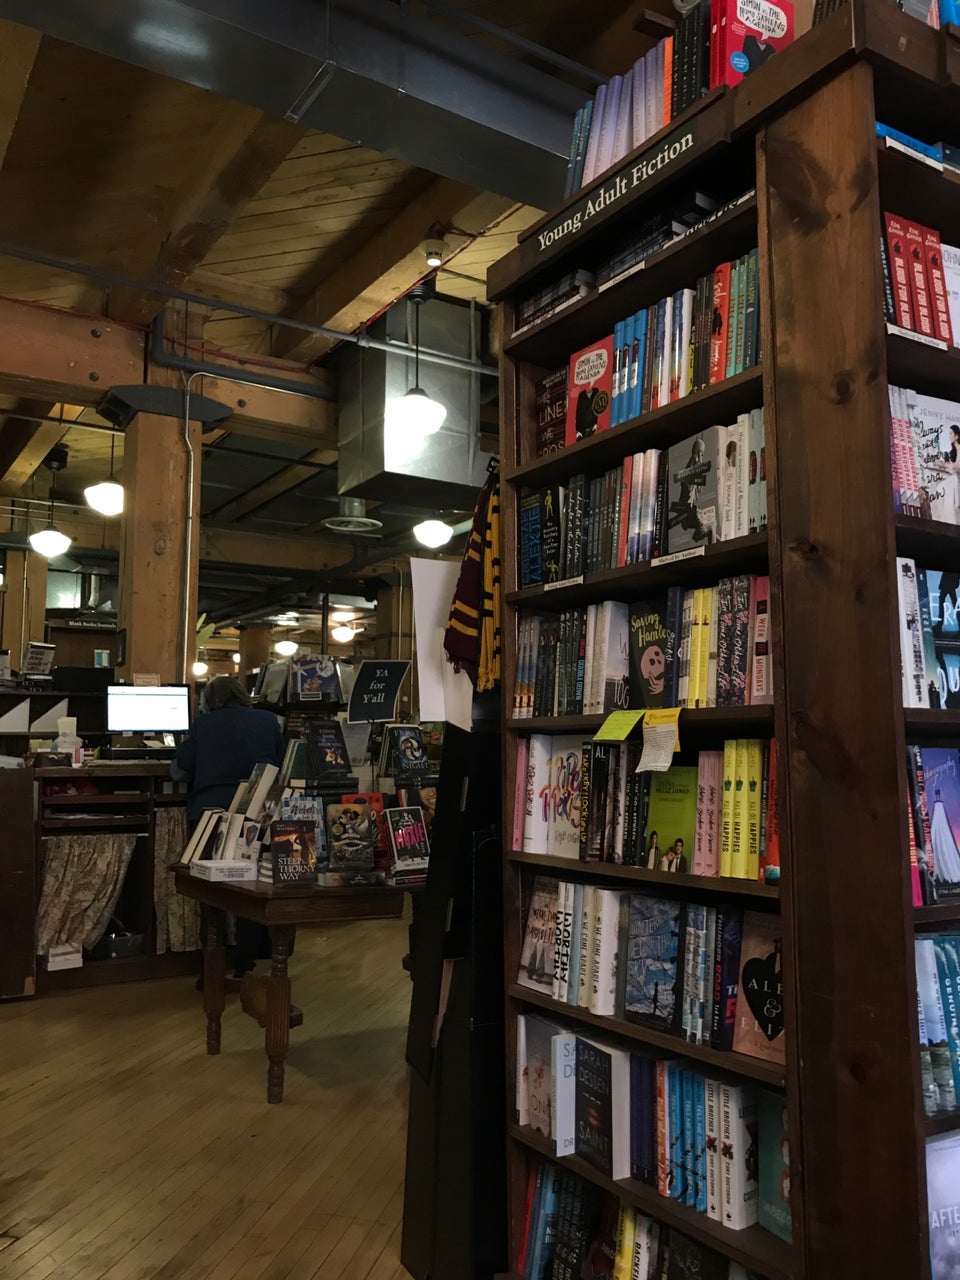 Photo of Tattered Cover McGregor